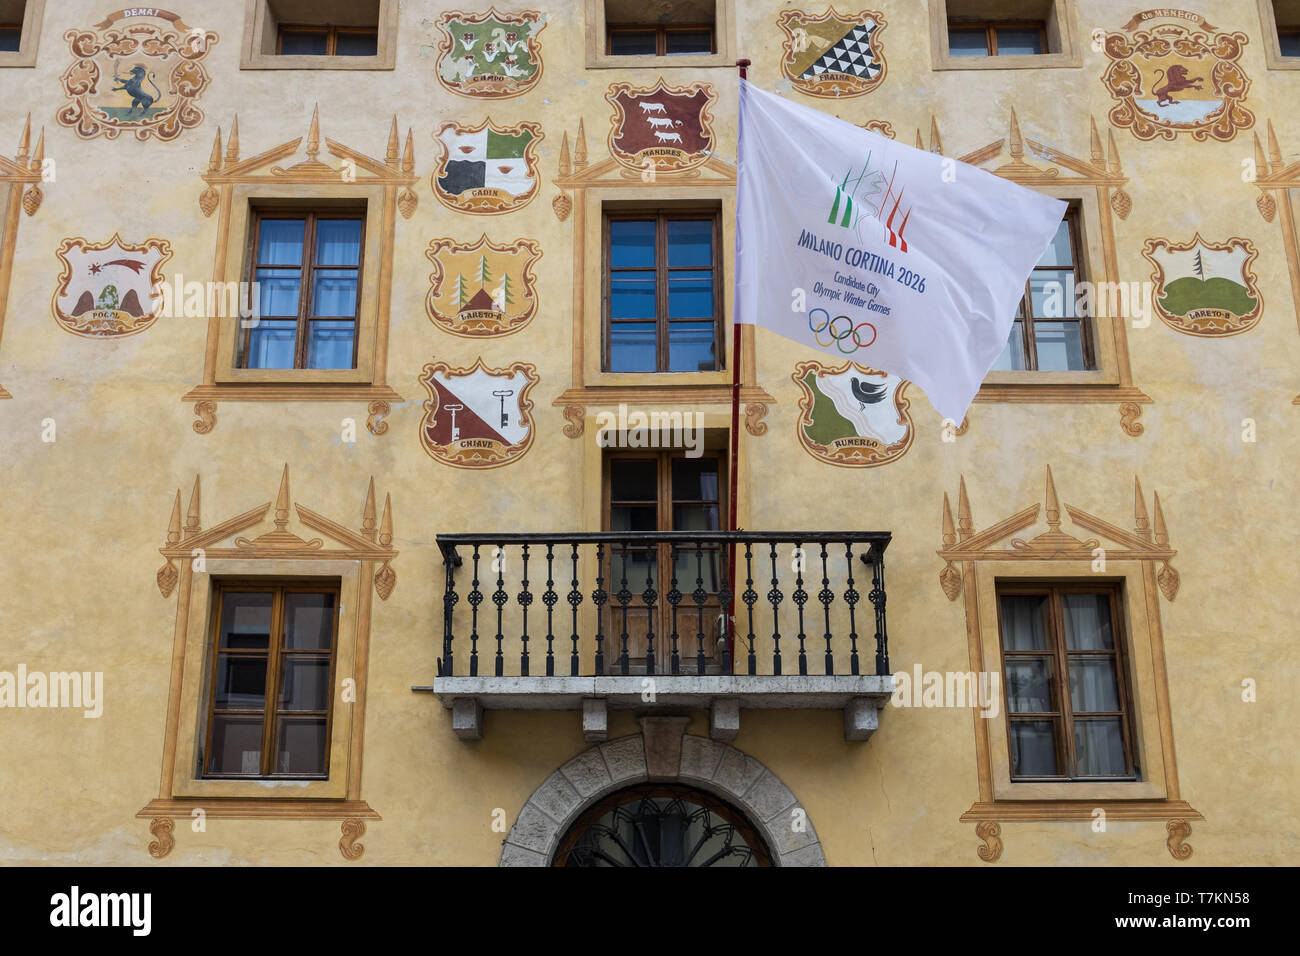 Flag of Milano Cortina candidate city for Olympic Winter Games 2026 on a historic building in Cortina D’Ampezzo, Italy Stock Photo